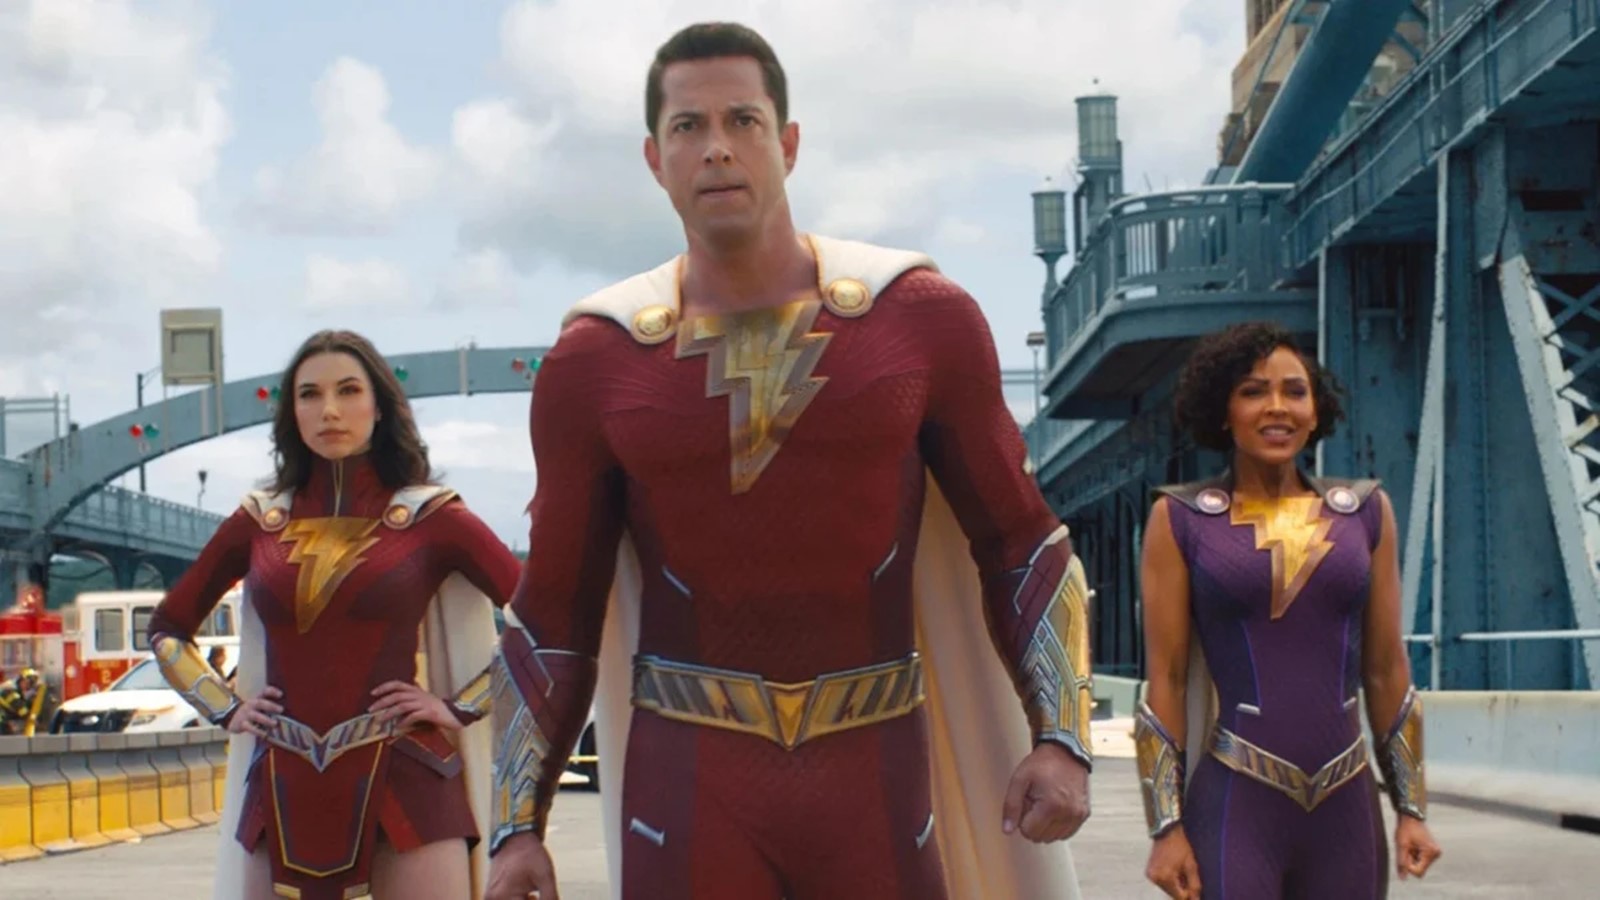 Shazam!  Fury of the gods: the director reveals a fun "mistake" that nobody noticed